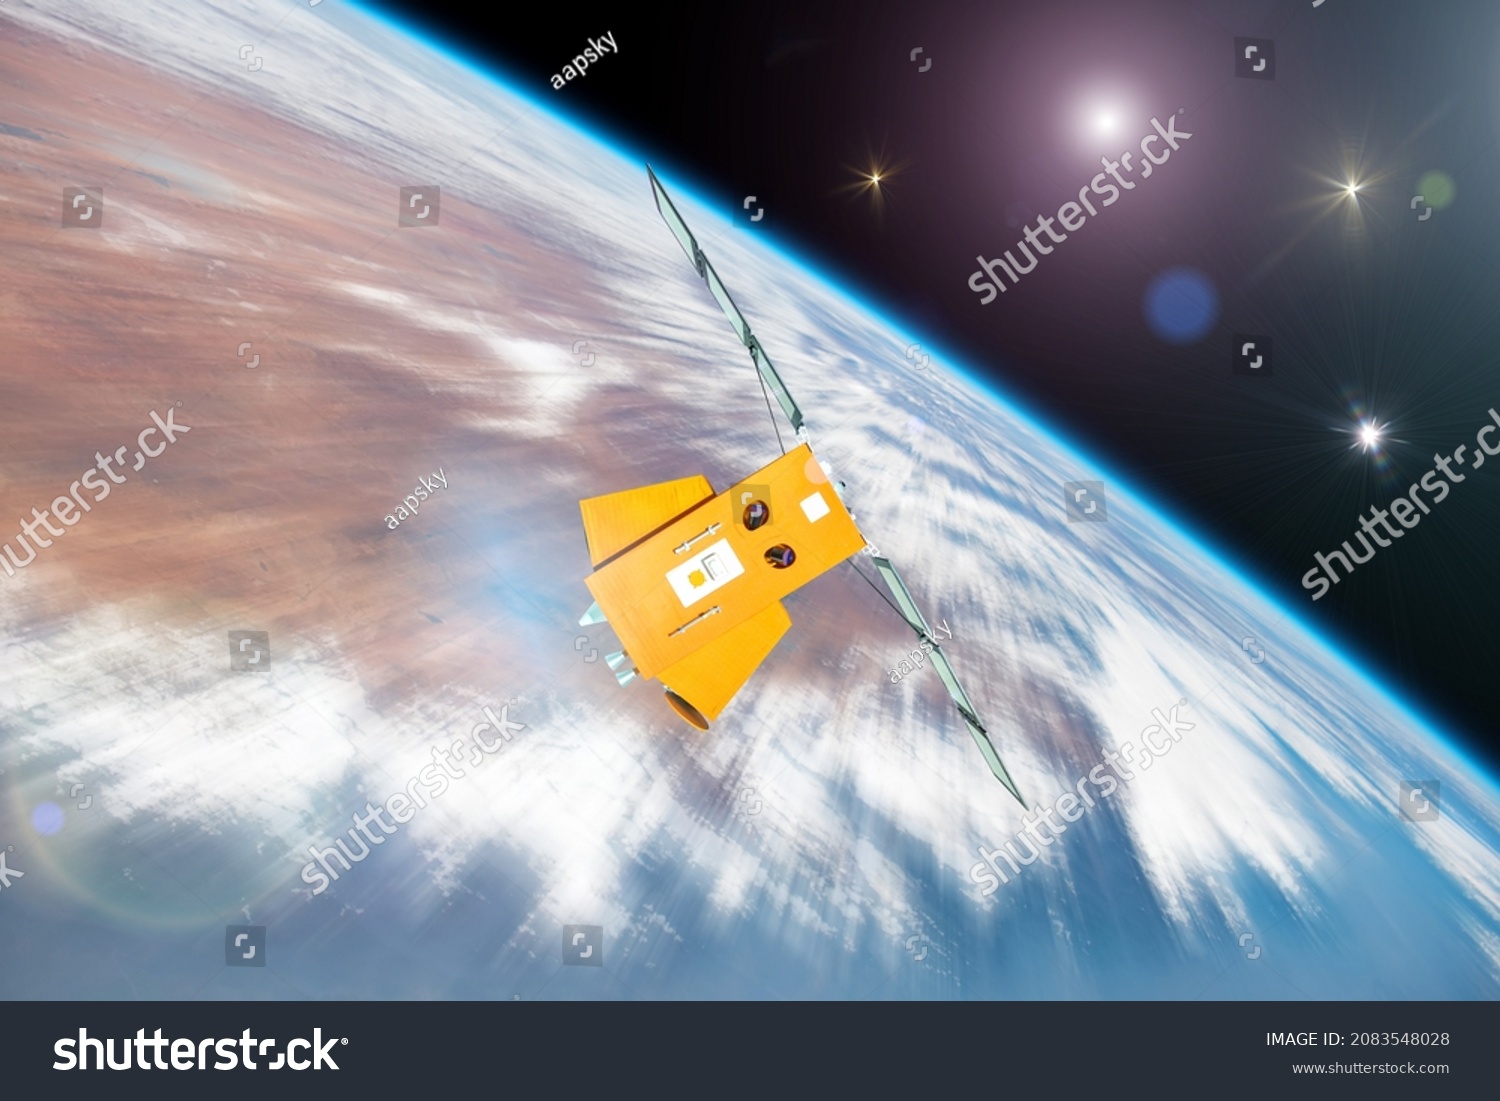 Orbiting satellite rushes through space orbiting the Earth. Elements of this image furnished by NASA. #2083548028